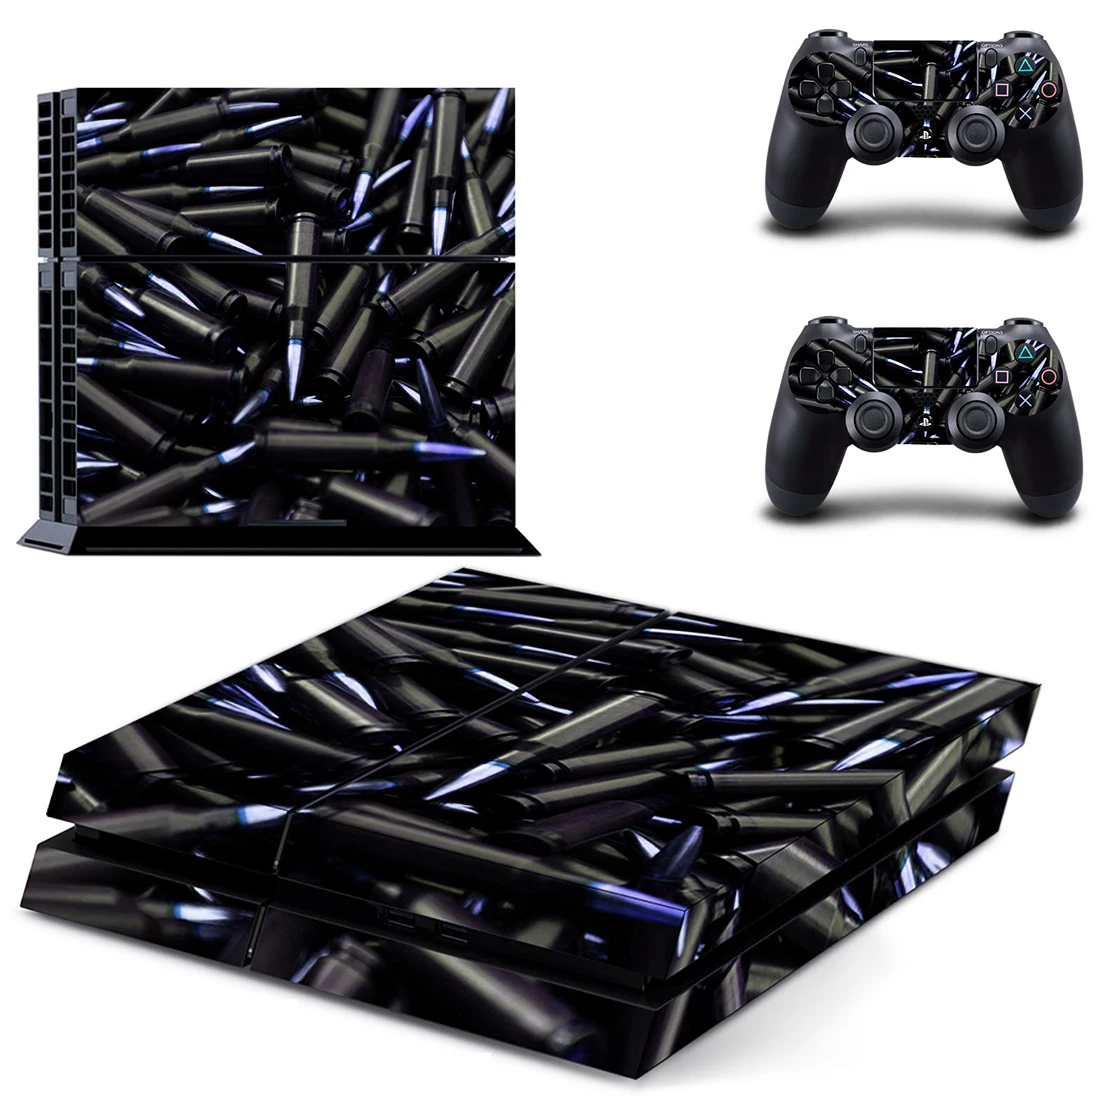 

Bullet Style PS4 Skin Sticker for Playstation 4 Console & 2 Controllers Decal Vinyl Protective Skins Style 1